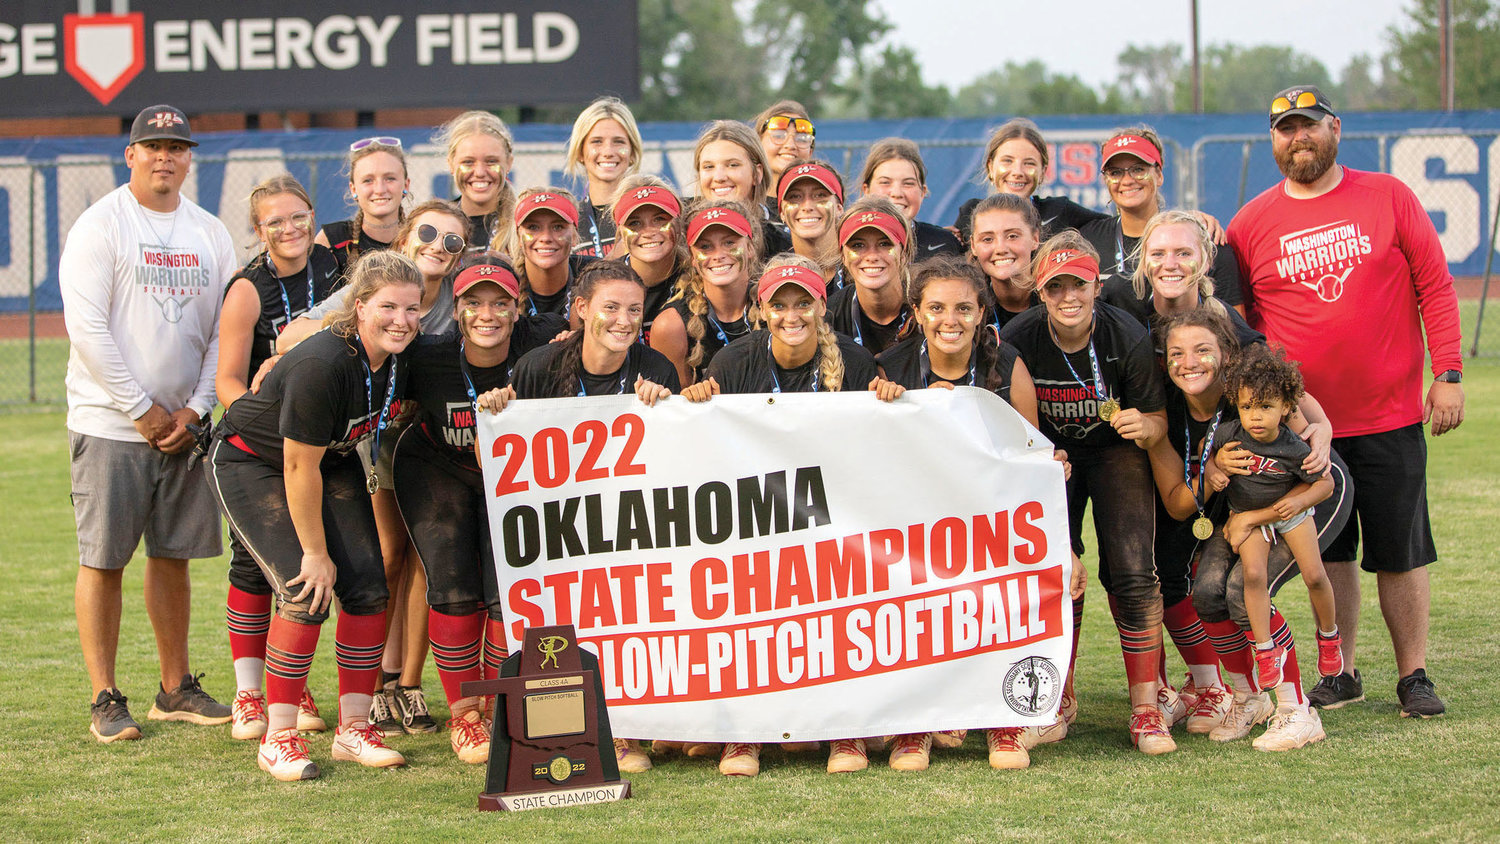 The Washington Warriors won the State championship at ASA Hall of Fame Stadium Monday after they defeated Dale 17-7. Pictured are, from front left, Maggie Place, Elly Allison, McKenzie Bost, Mattie Richardson, Isa Portillo, Abby Wood and Daisy Lampkin. In the middle row are, from left, Hudson Dode, Bailey Hyde, Skylar Wells, Ellie Loveless, Halle Andrews, Tinley Lucas, Emjay Lucas and Haven Brewer. On the back row are, from left, coach Tylor Lampkin, Arlie Wilson, Elyssa Dorsett, Addy Larman, Olivia Palumbo, Alexis Gay, Sage Ryan, Taylon Elliott, Ava Grimes, Mikala West and coach Shane Labeth. The Warriors finished with a 40-2 record this season.